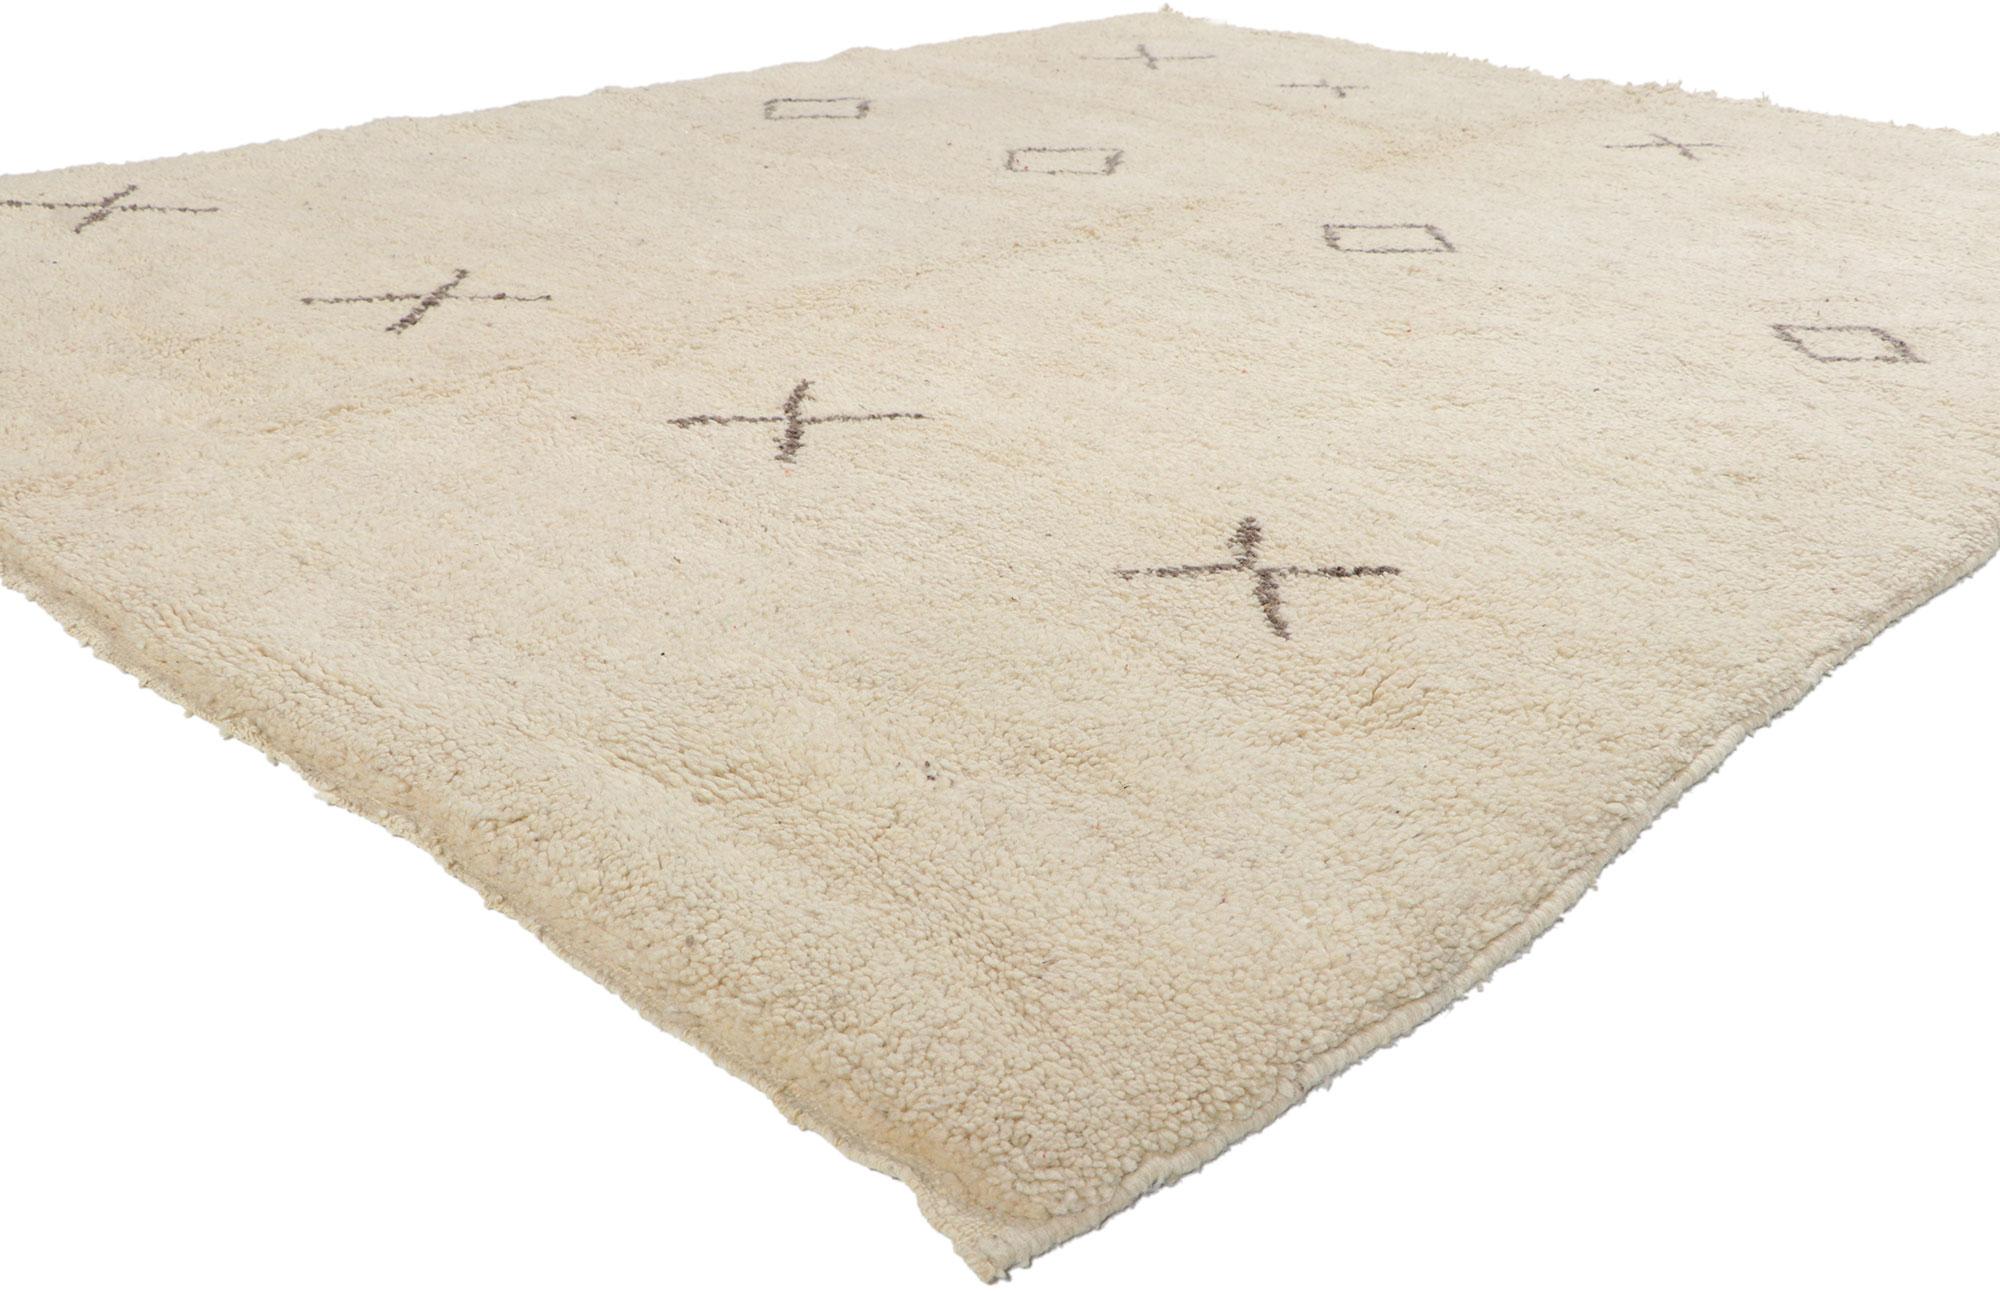 78367 Vintage Moroccan Beni Ourain Rug, 06'10 x 09'02. With its nomadic charm and brutalist connotations, this hand knotted wool vintage Beni Ourain Moroccan rug is a captivating vision of woven beauty. The abrashed beige field features a simple